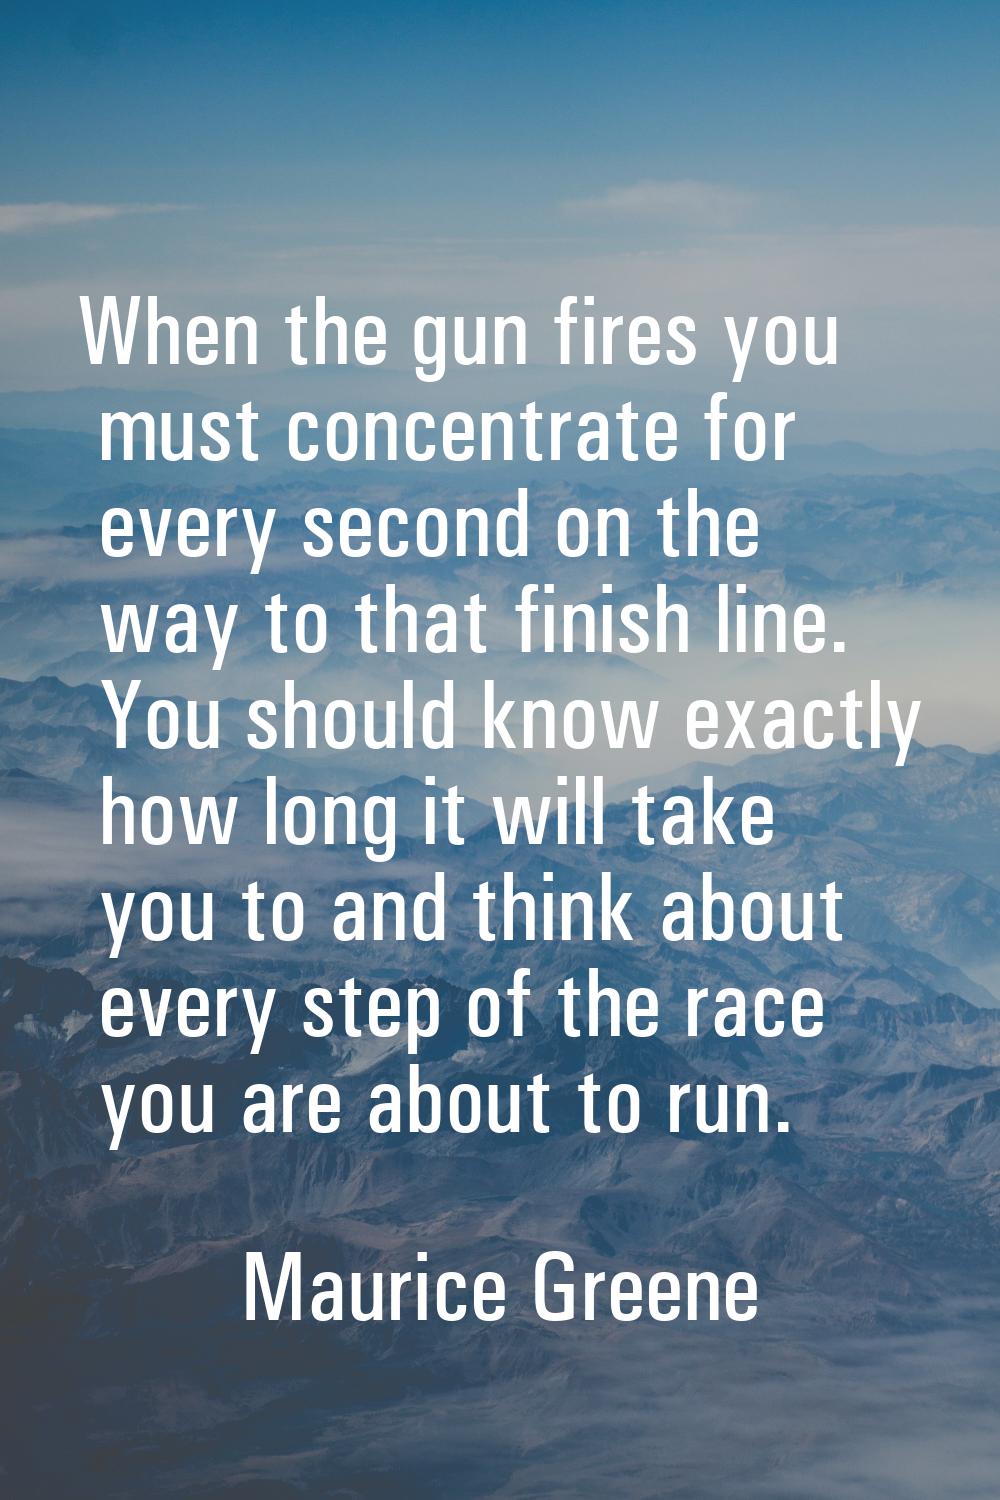 When the gun fires you must concentrate for every second on the way to that finish line. You should